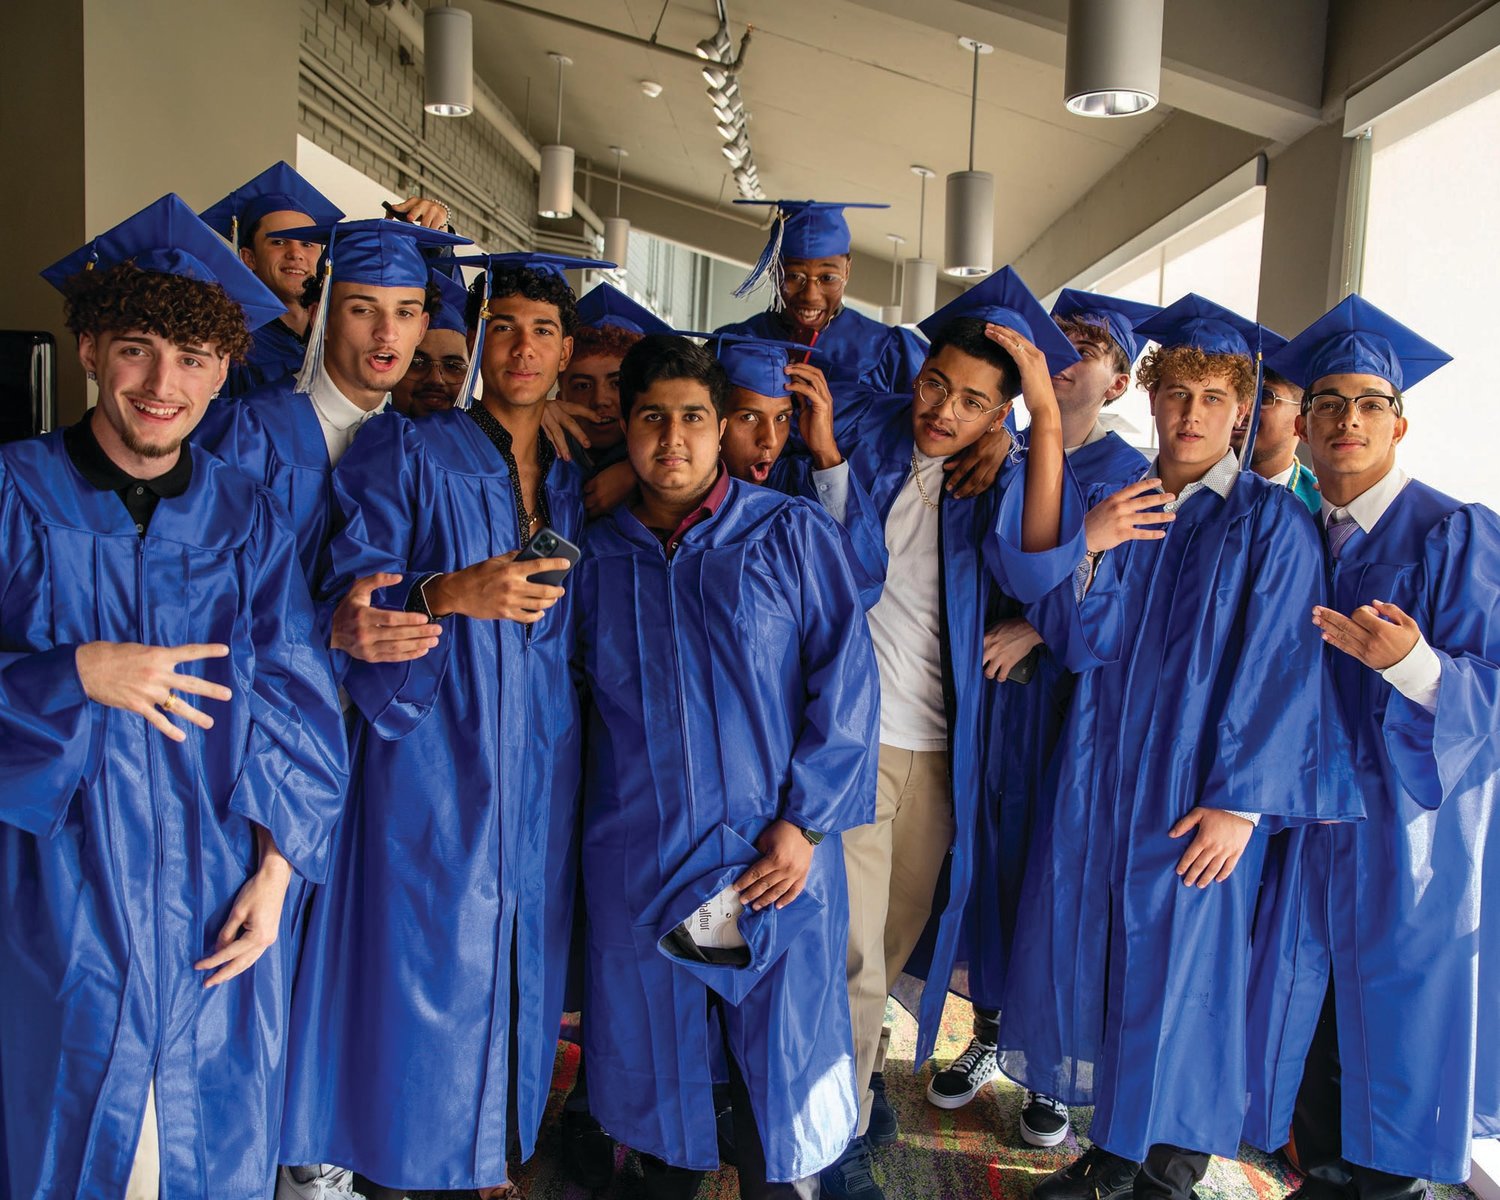 ANXIOUS GRADS: Above and below, the Johnston Senior High School Class of 2022 lined up in a hallway behind the scenes of the ceremony held Friday at Veterans Memorial Auditorium in Providence. (Photos by Leo van Dijk/rhodyphoto.zenfolio.com)